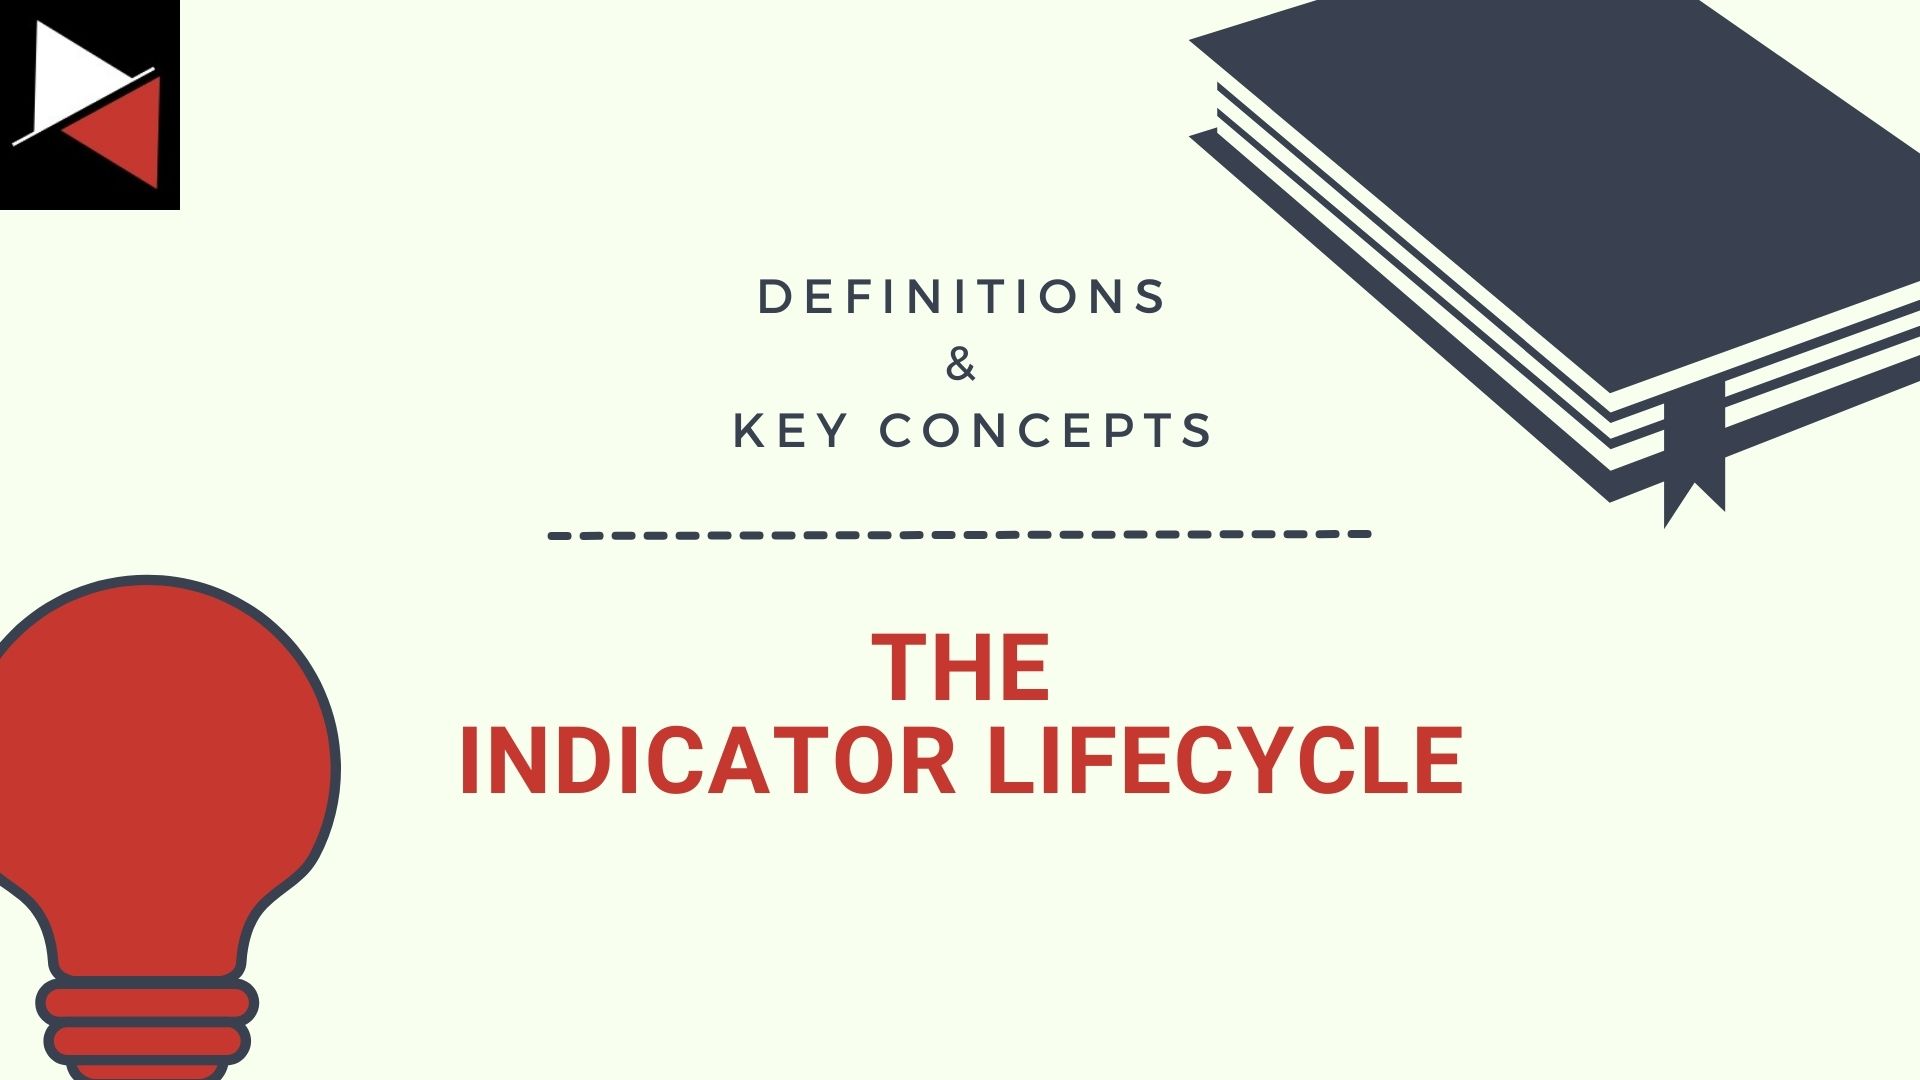 The Indicator Lifecycle